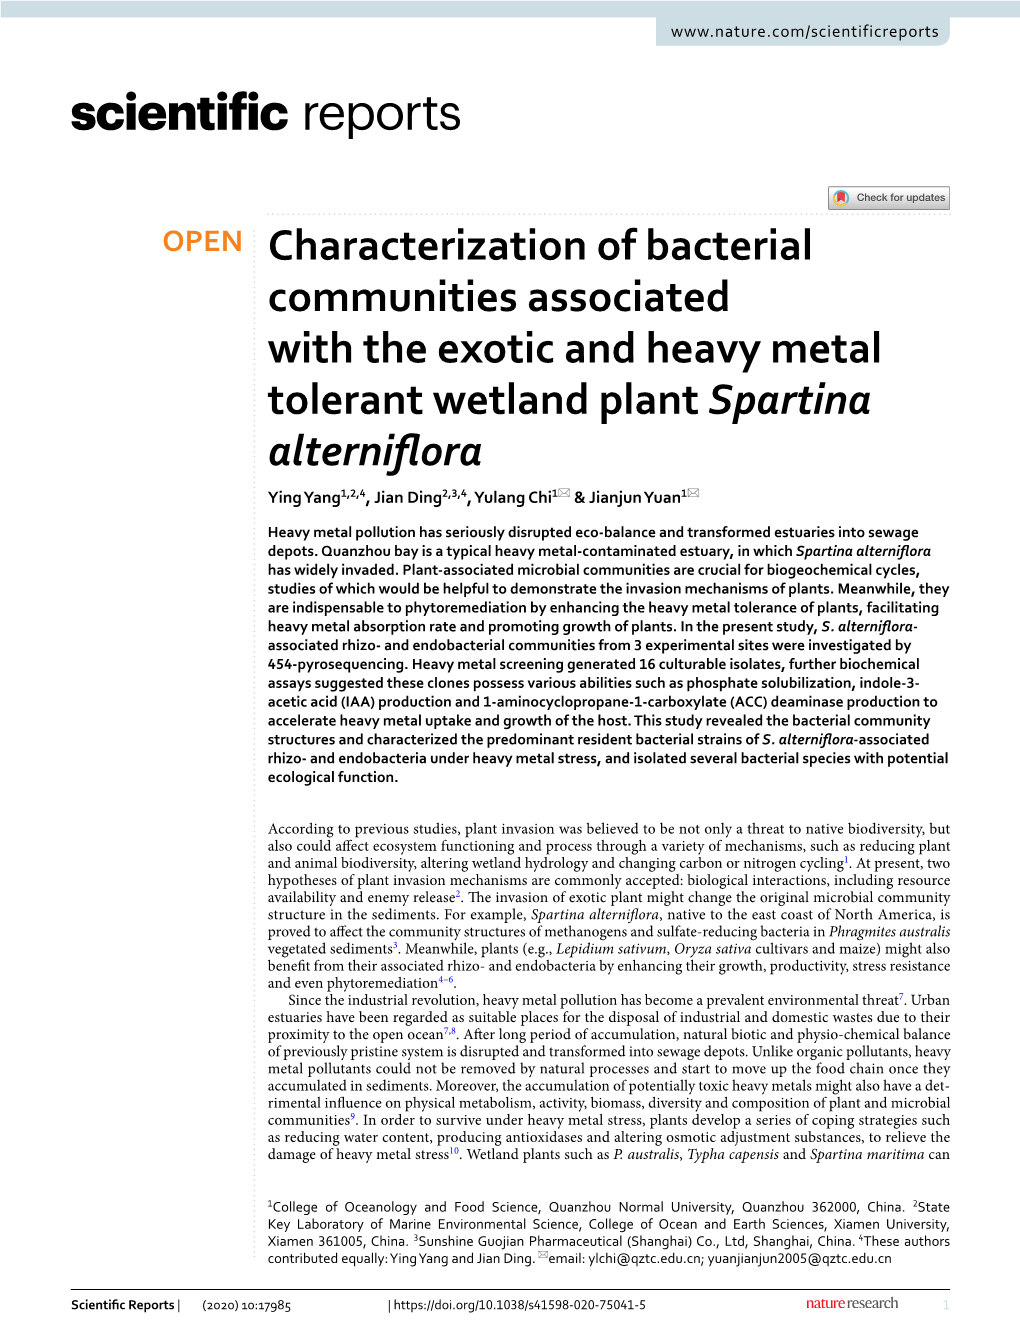 Characterization of Bacterial Communities Associated with the Exotic and Heavy Metal Tolerant Wetland Plant Spartina Alterniflor